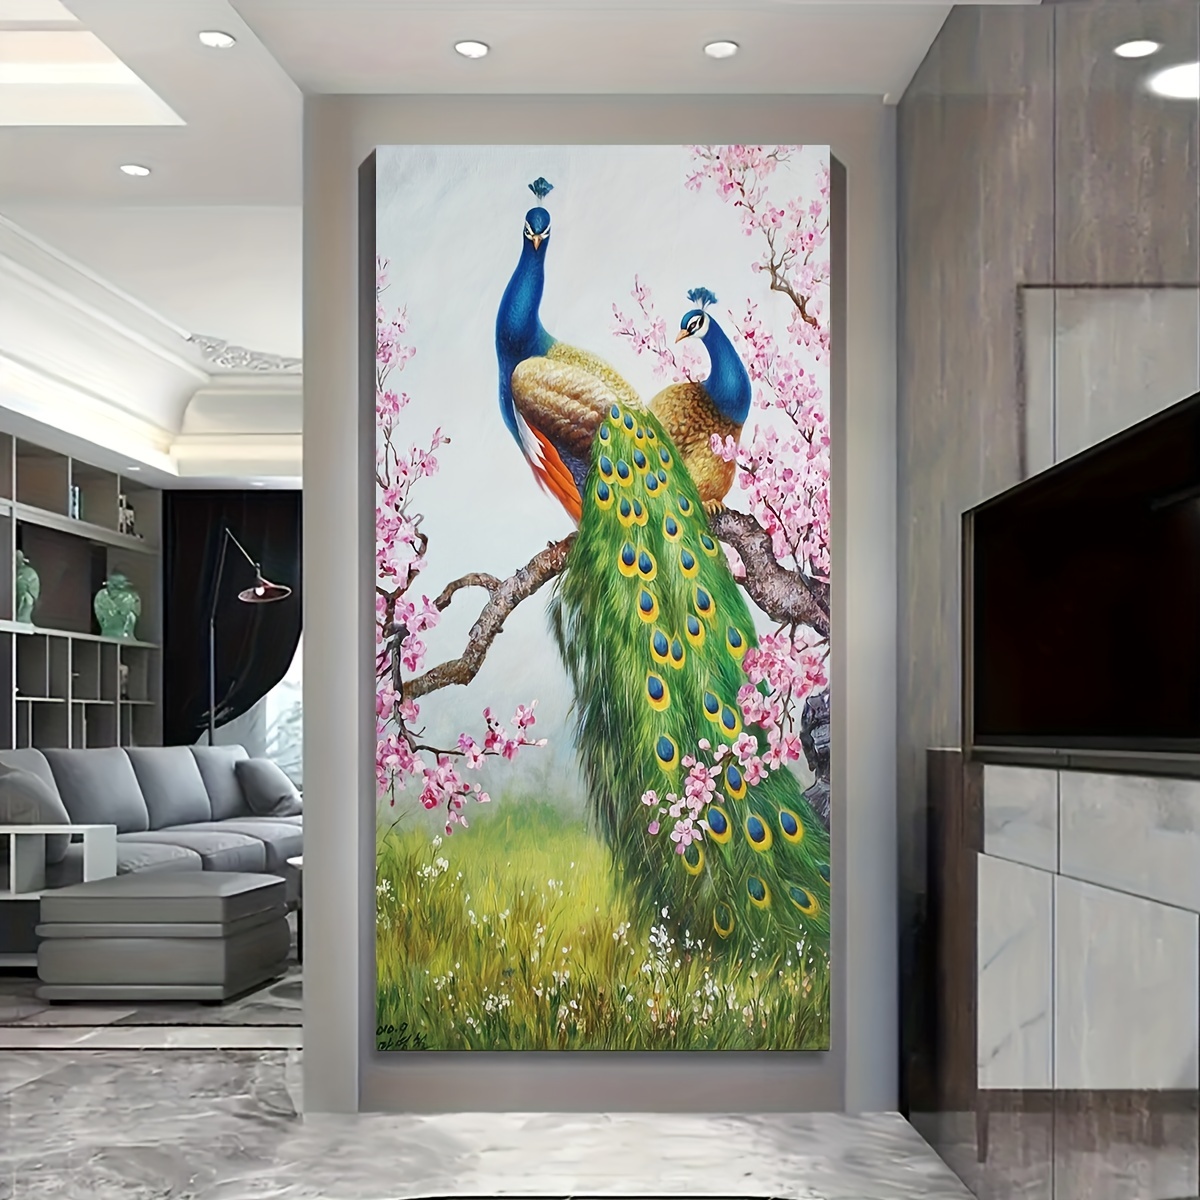 1pc, Canvas Painting, Peacock And Flower Oil Painting Wall Art Decor,  Living Room Wall Decor, Bedroom Wall Decor, Canvas Wall Art Decor, Home  Decor, R